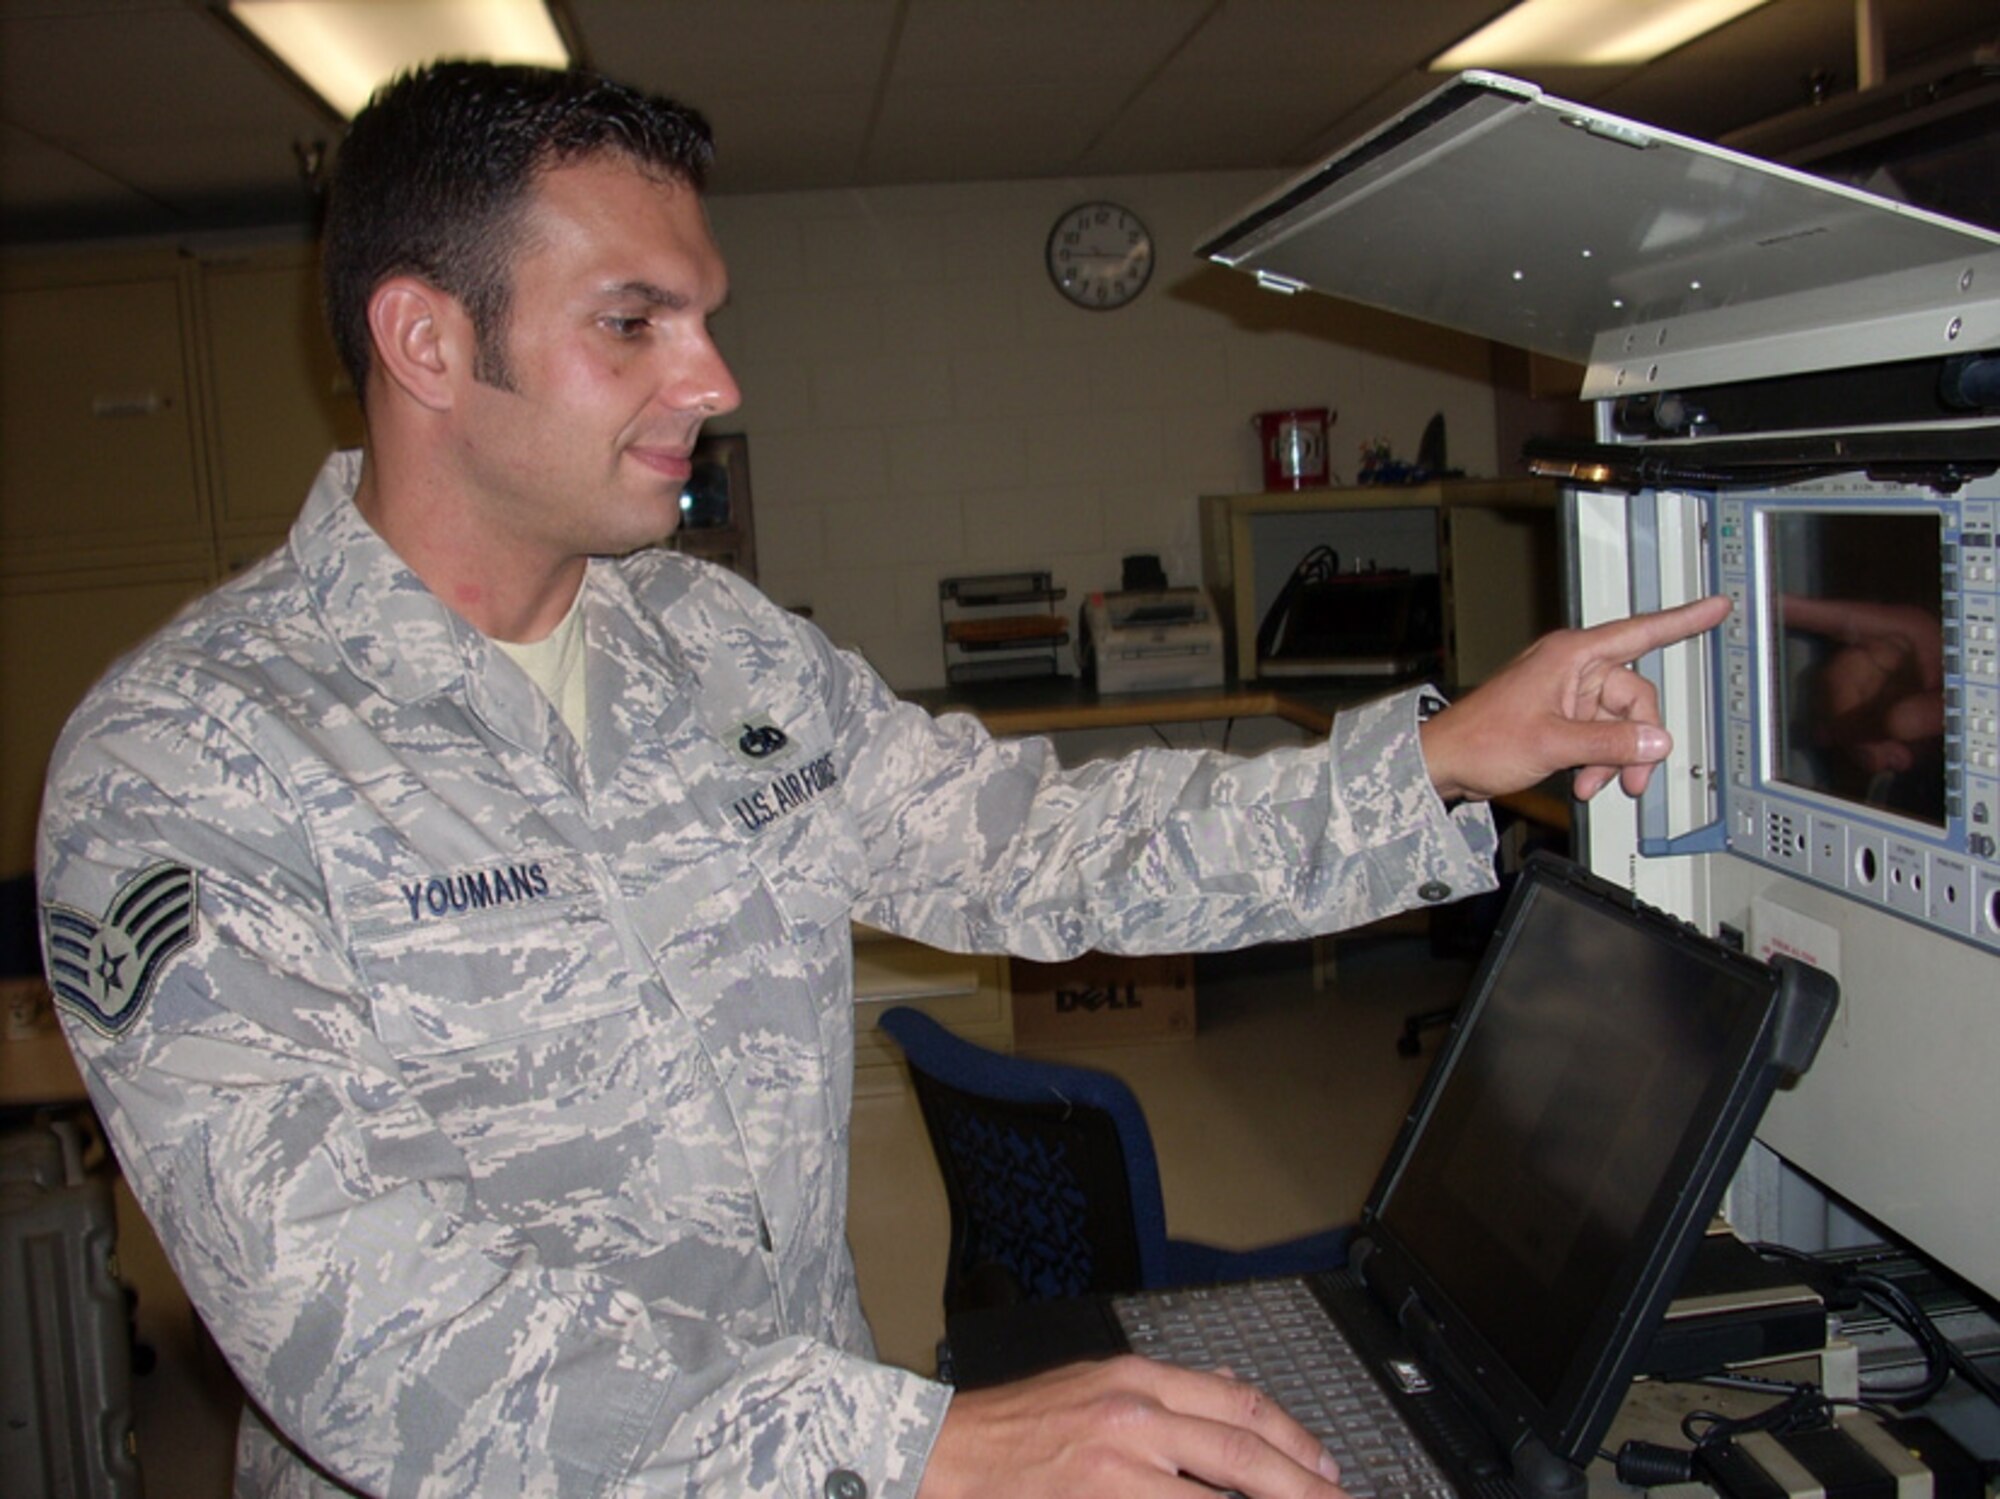 Staff Sgt. Ed Youmans, 16th Electronic Warfare Squadron, demonstrates a procedure on the USM 642 "Raven" signal generator - a machine that simulates any real world radar emitter and allows the Combat Shield team to assess aircraft's response to those signals.  The Combat Shield unit is tasked with testing the air defense systems of all A-10s, F-15s, F-16s, HH-60s and C-130s in the Air Force inventory.  U.S. Air Force photo.